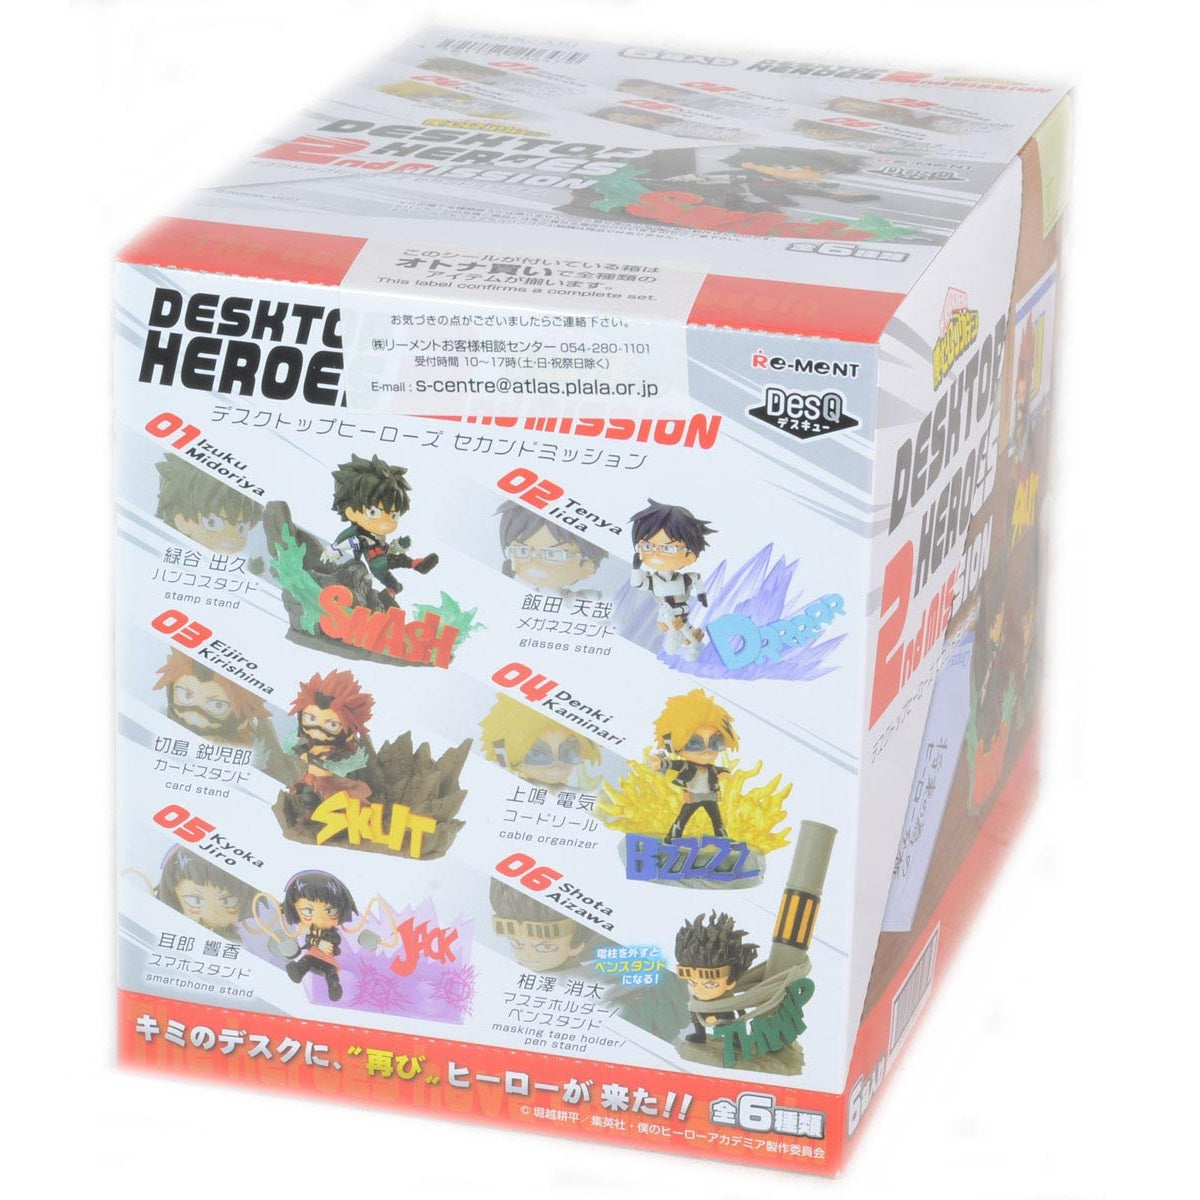 Re-Ment My Hero Academia DesQ Desktop Heroes 2nd Mission-Whole Box (Complete Set of 6)-Re-Ment-Ace Cards &amp; Collectibles